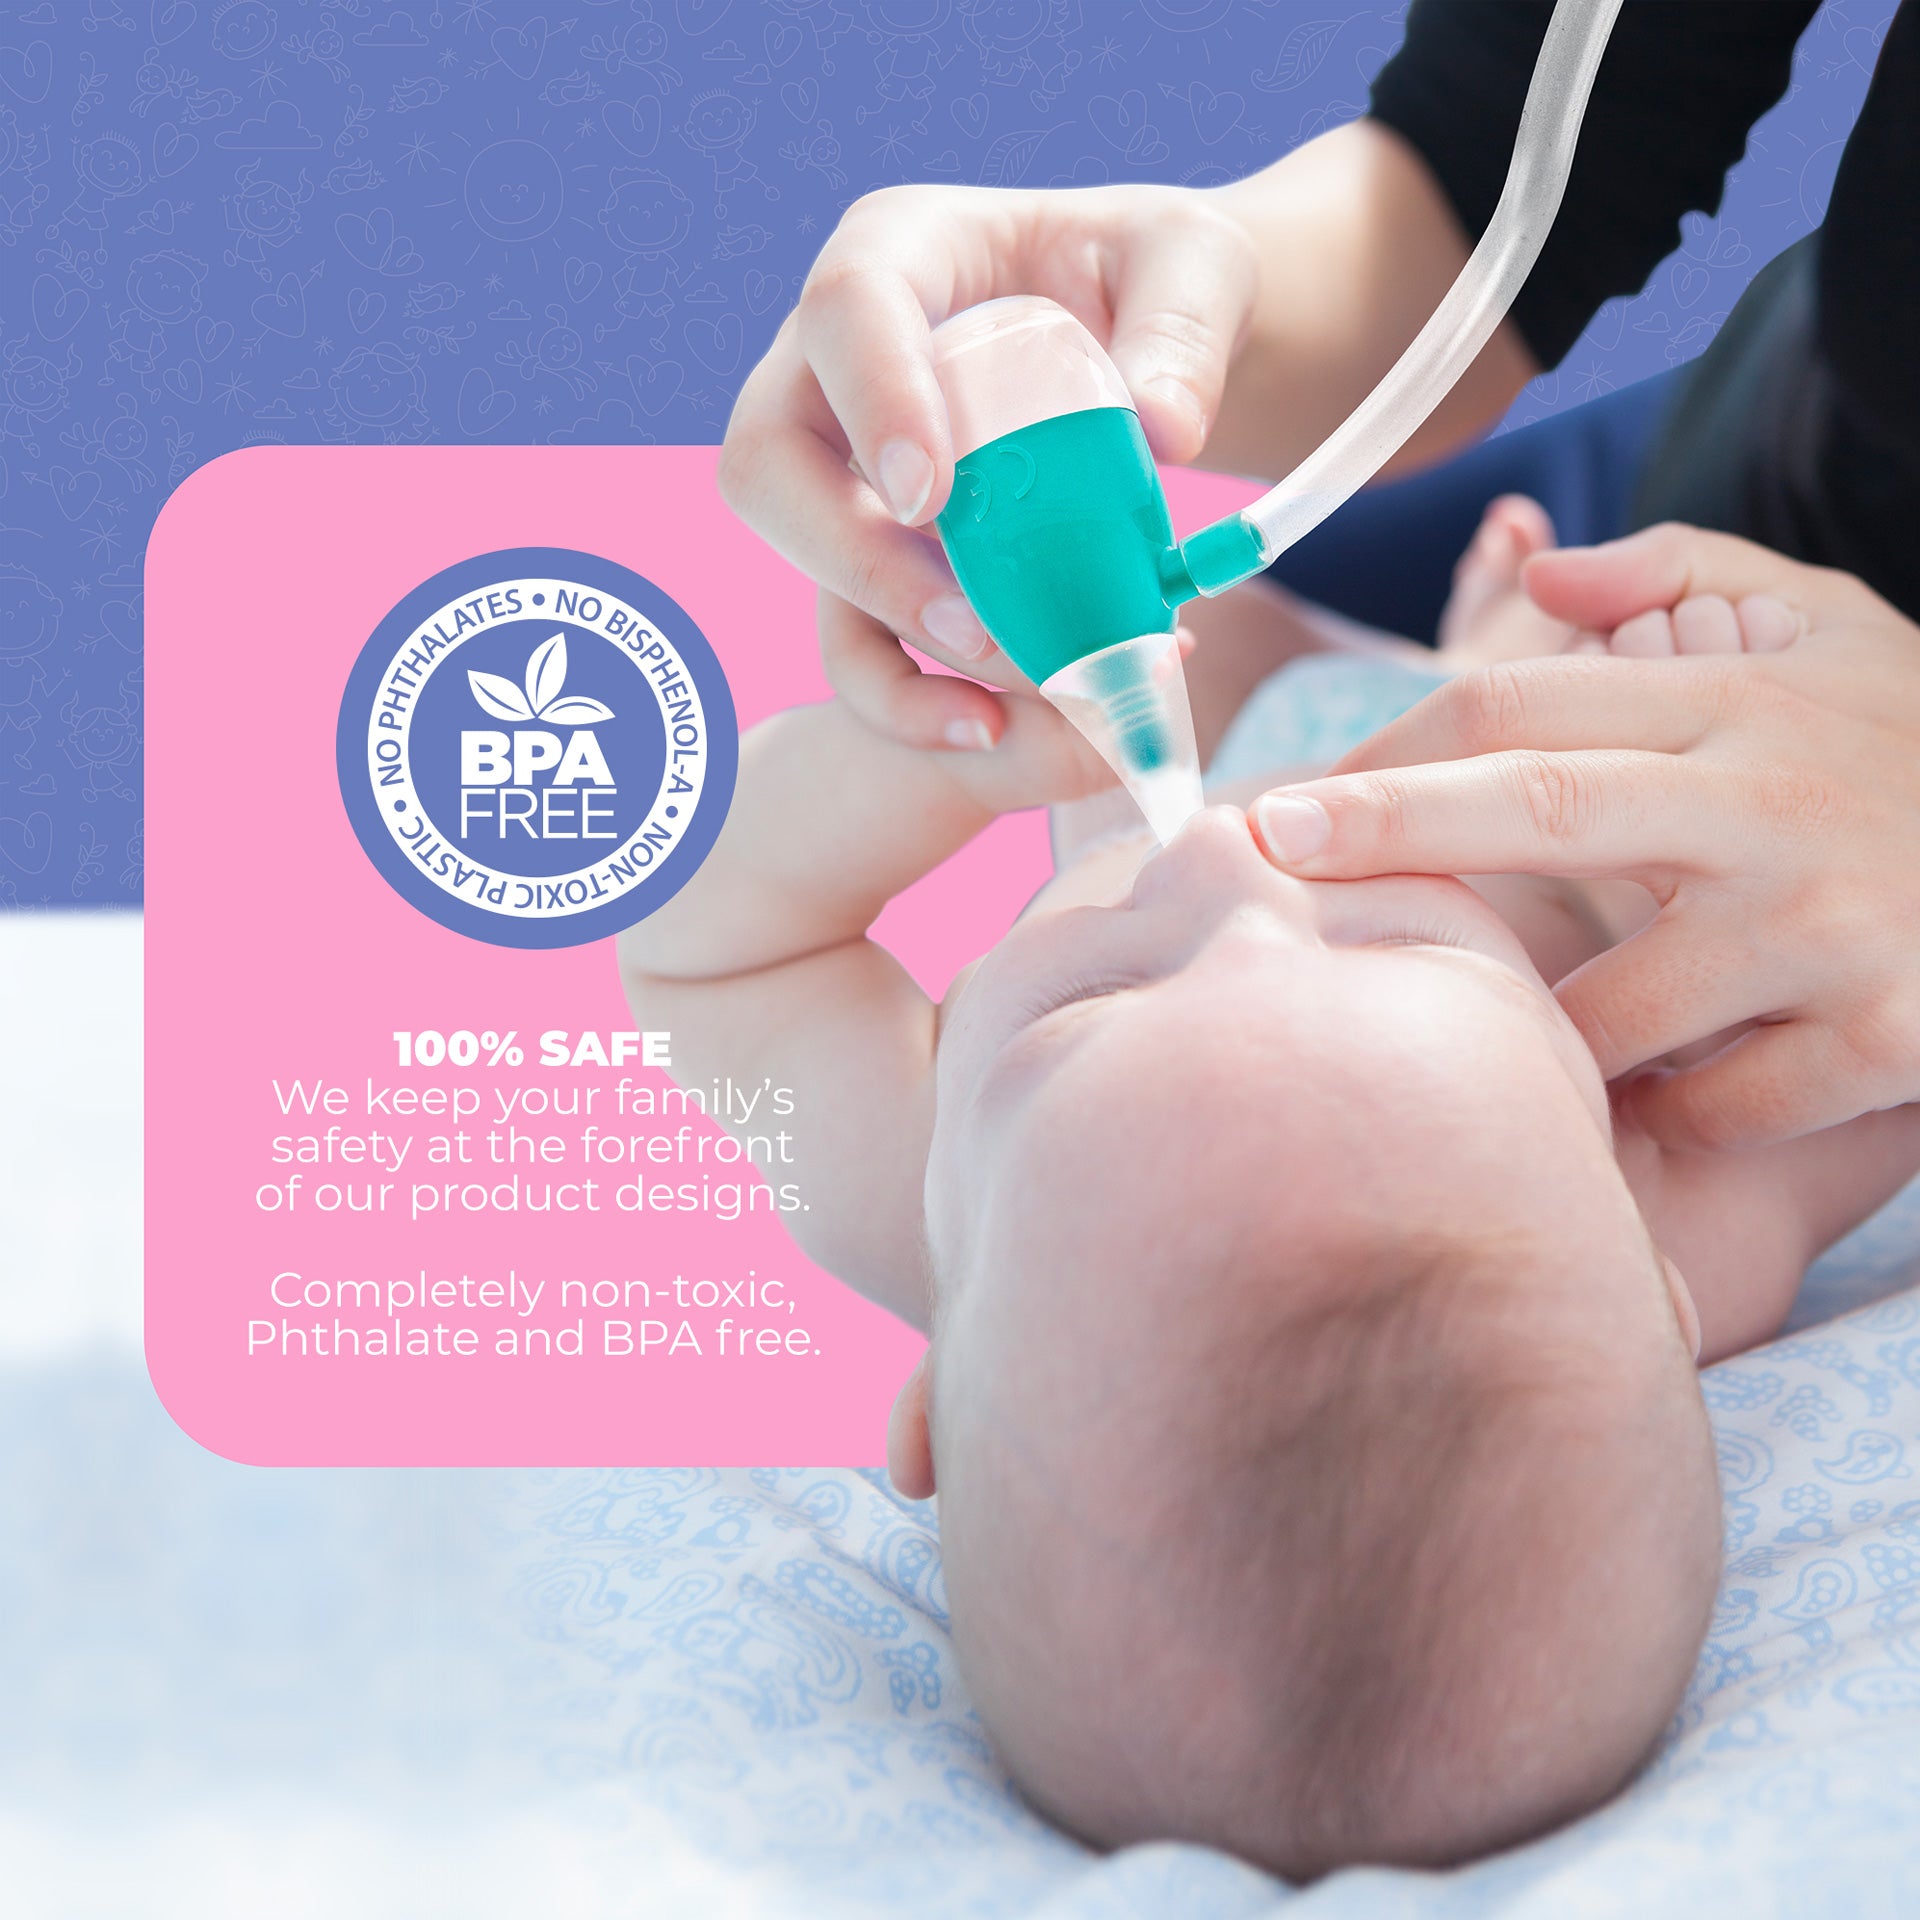 OCCObaby Baby Nasal Aspirator Lifestyle Image Retouching for Amazon and ECommerce Carousel Product Image Design by Scott Luscombe Creatibly